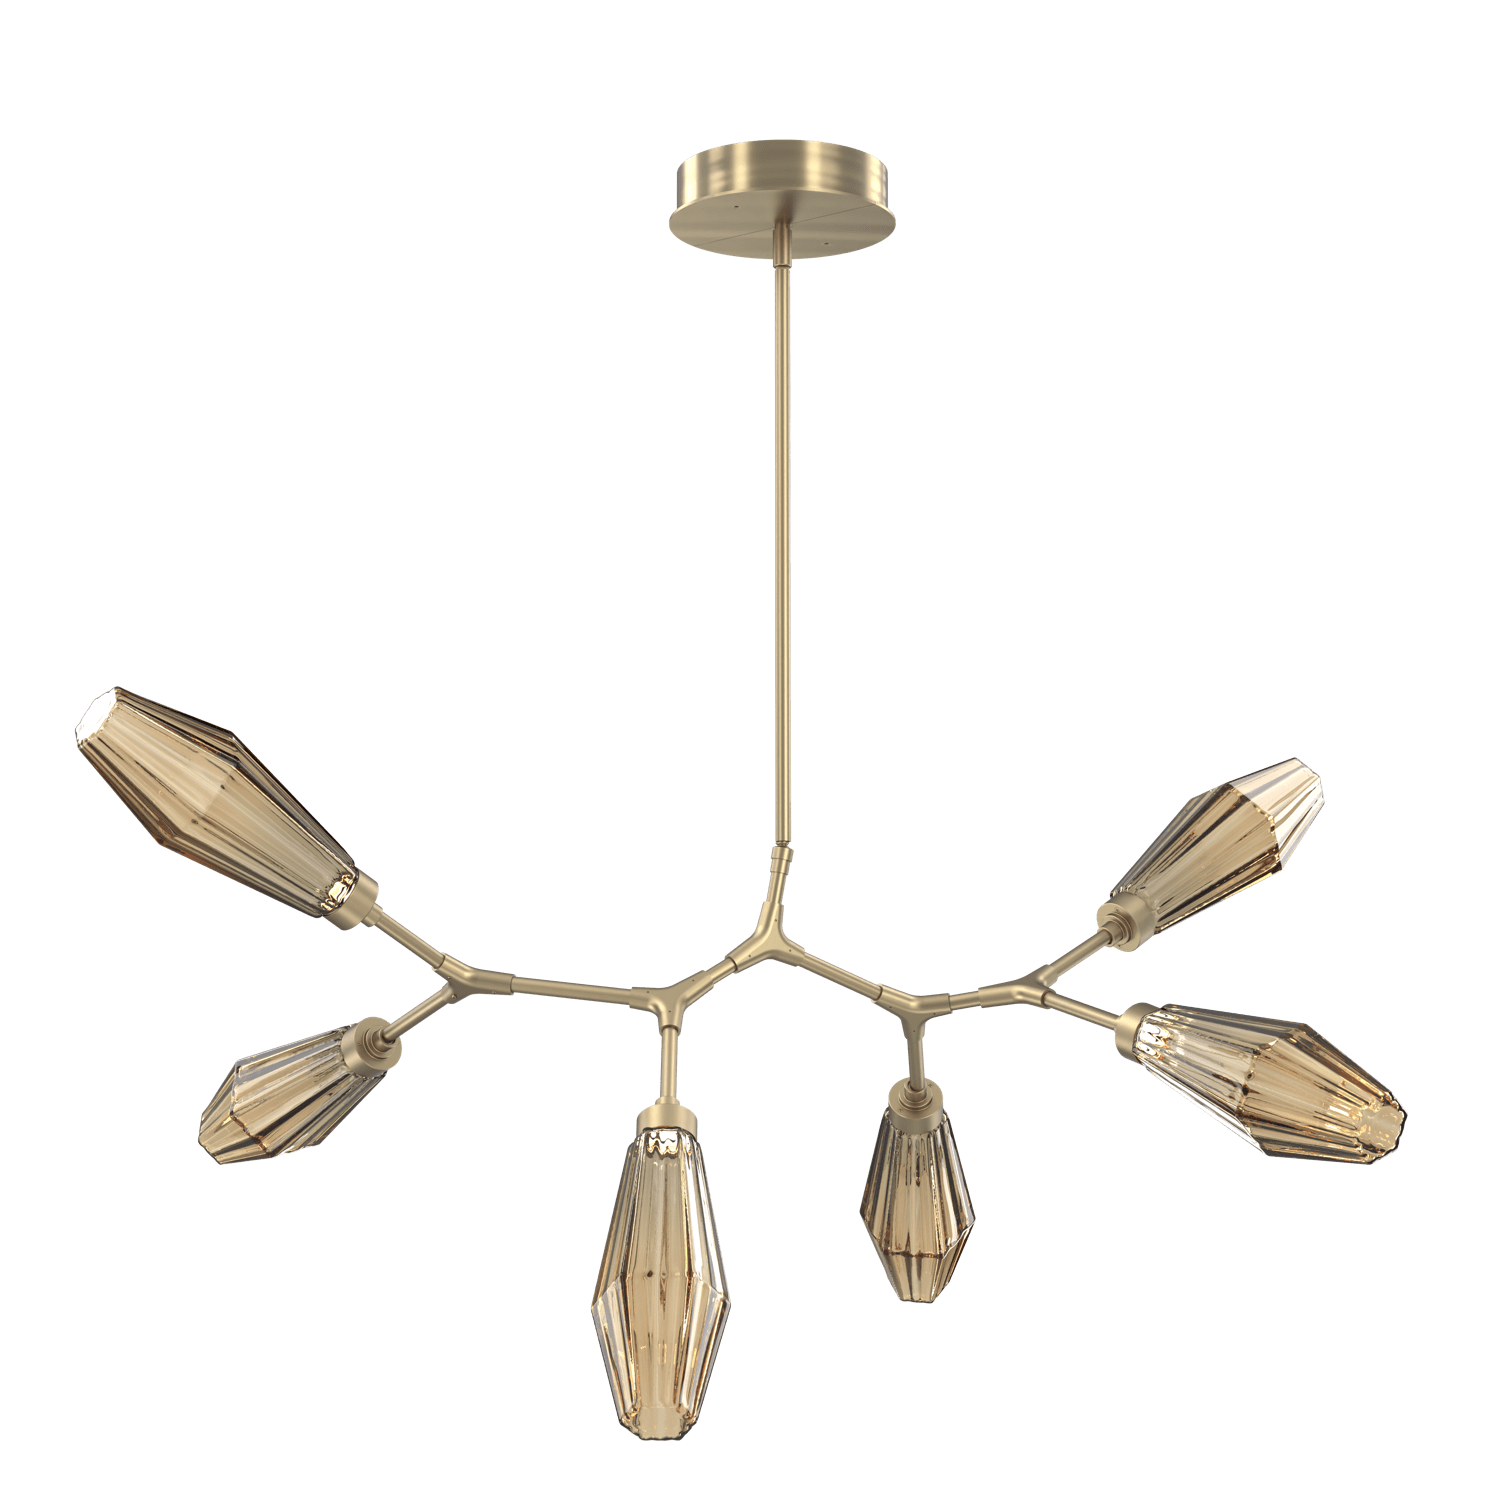 PLB0049-BA-HB-RB-Hammerton-Studio-Aalto-6-light-modern-branch-chandelier-with-heritage-brass-finish-and-optic-ribbed-bronze-glass-shades-and-LED-lamping